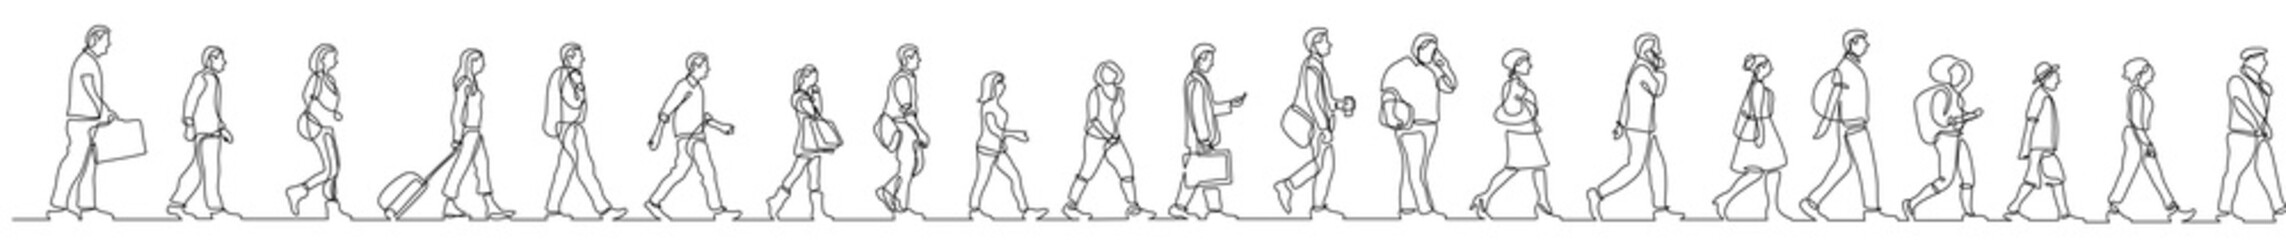 continuous line drawing vector illustration with FULLY EDITABLE STROKE of group of various diverse people walking on street